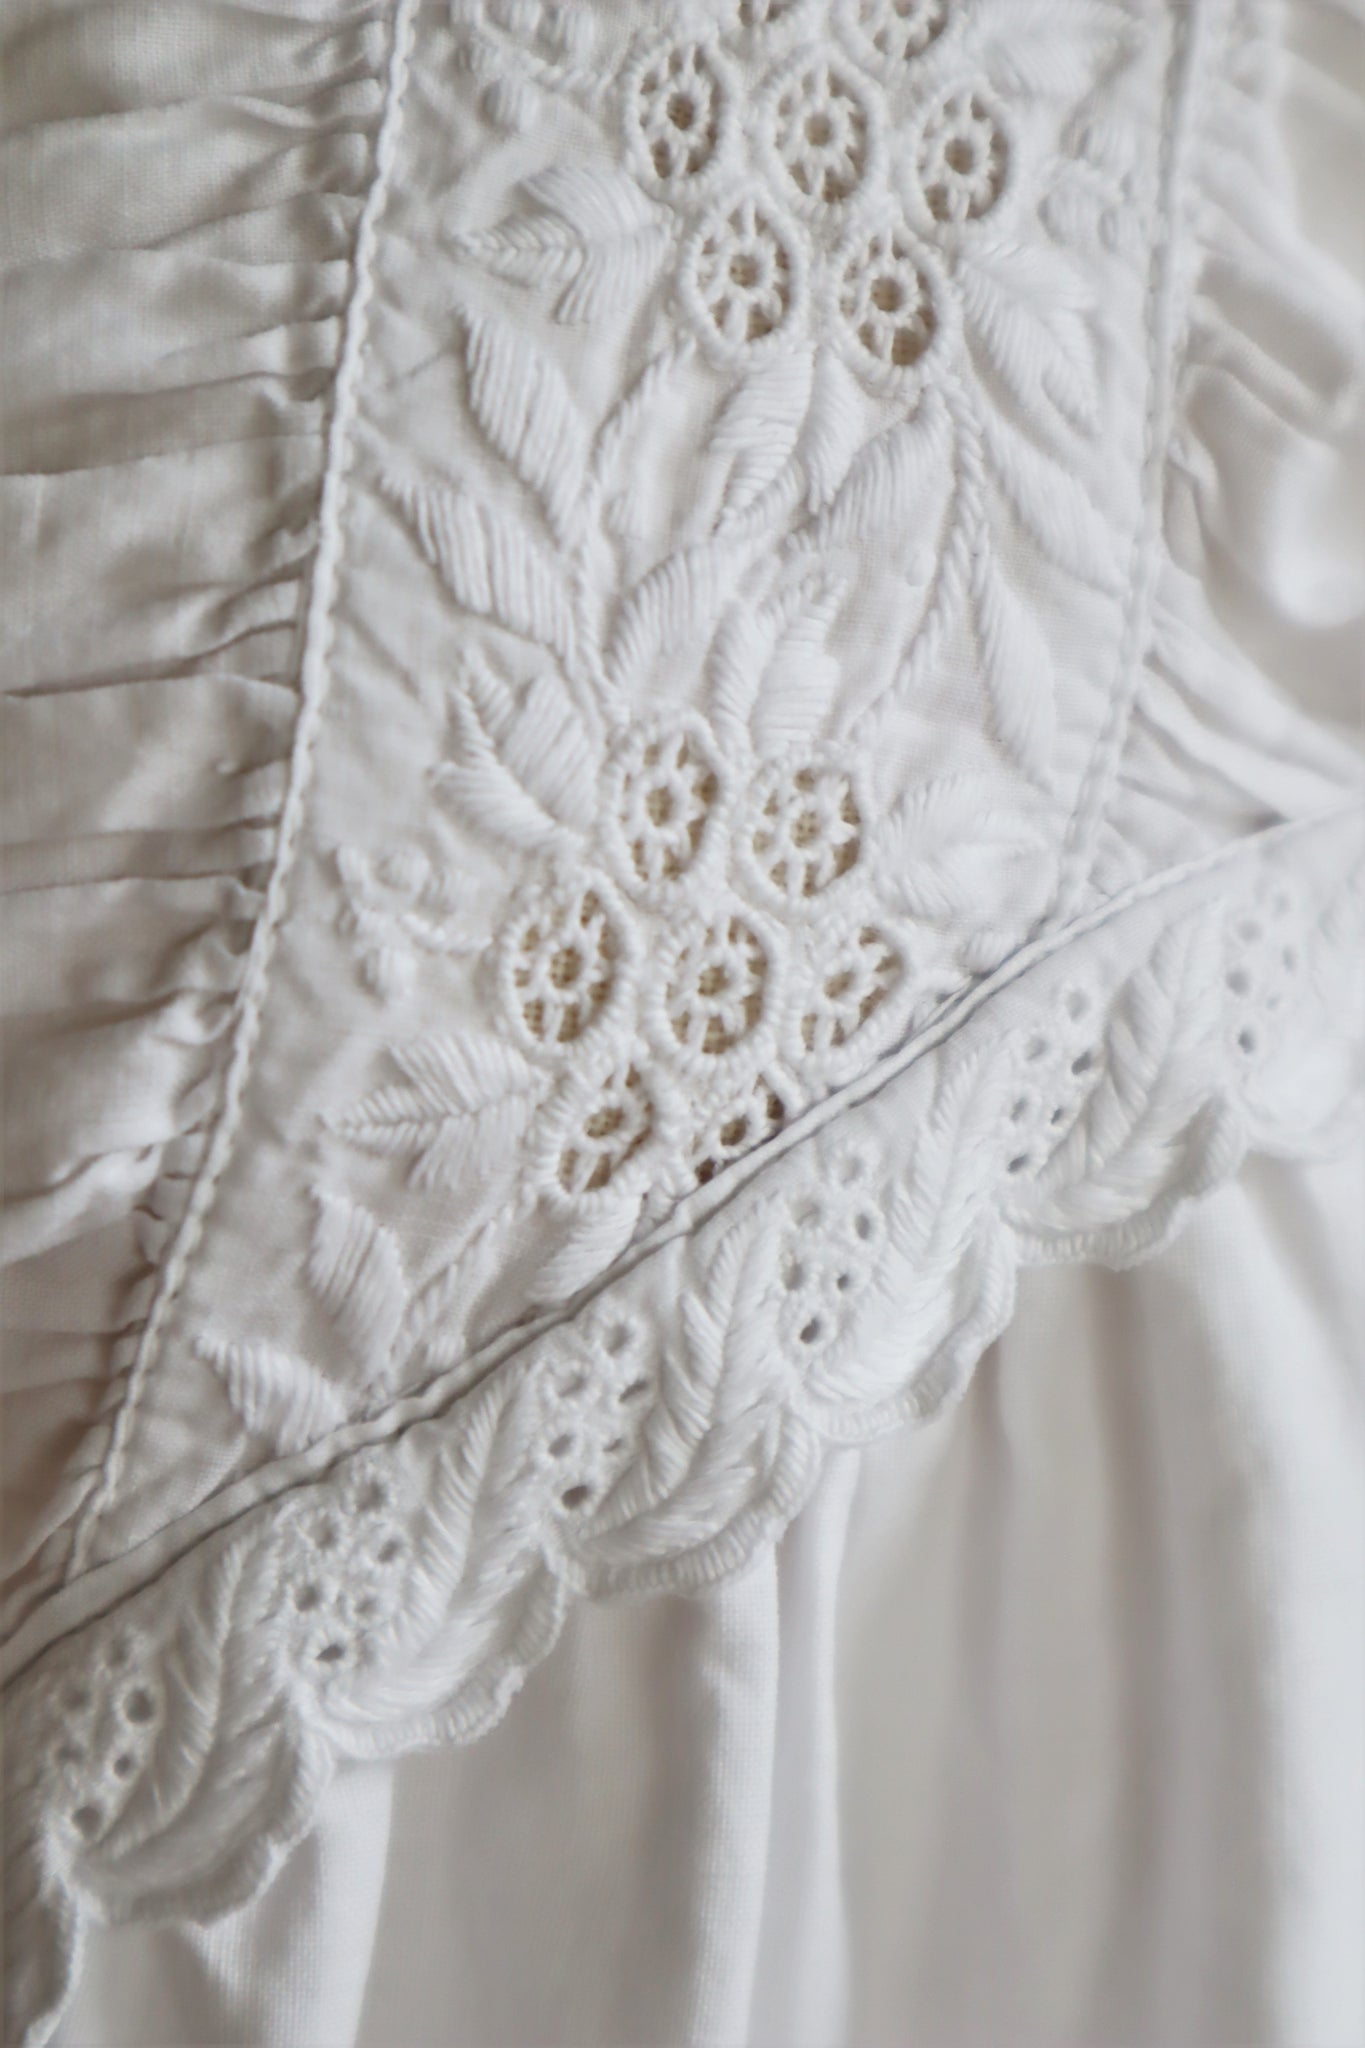 1900s Hand Embroidery Gather Design White Cotton Long Dress